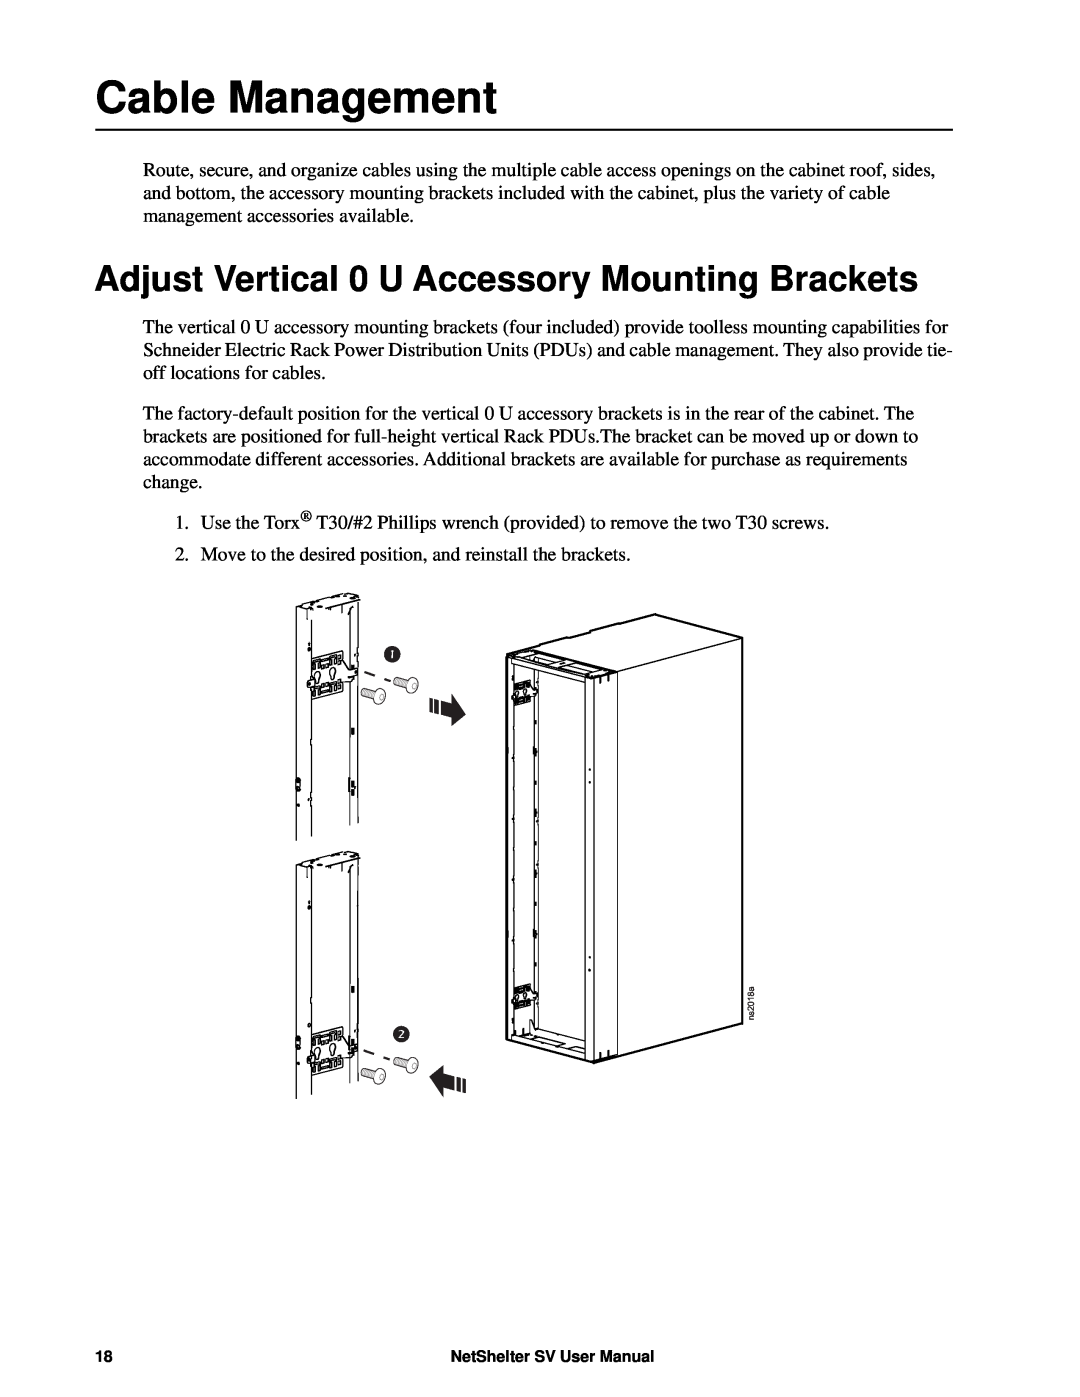 APC AR2400 user manual Cable Management, Adjust Vertical 0 U Accessory Mounting Brackets 